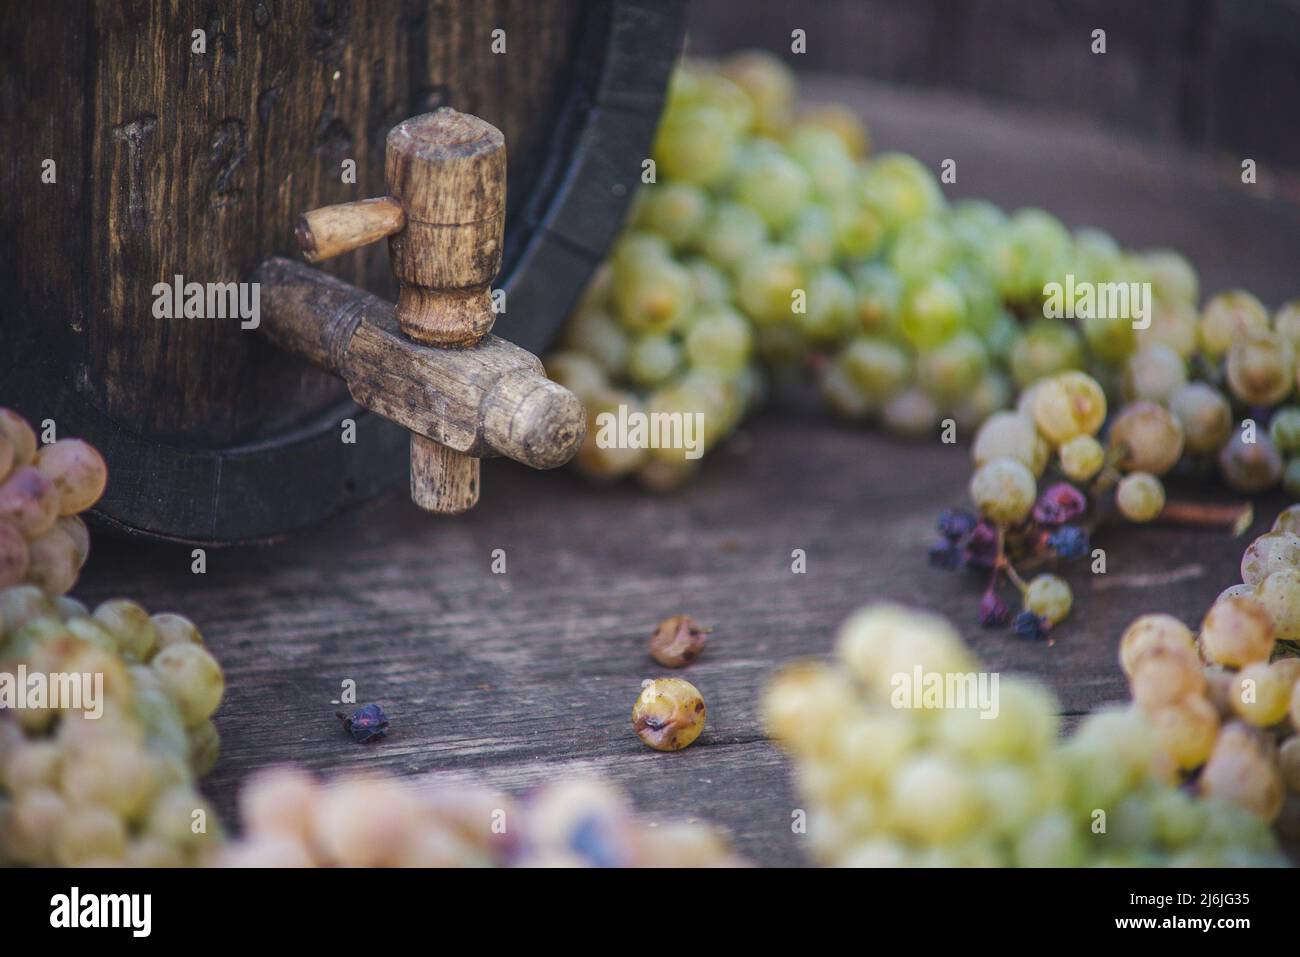 Wine barrel with Riesling grapes on barrel in the harvest season, Hungary Stock Photo